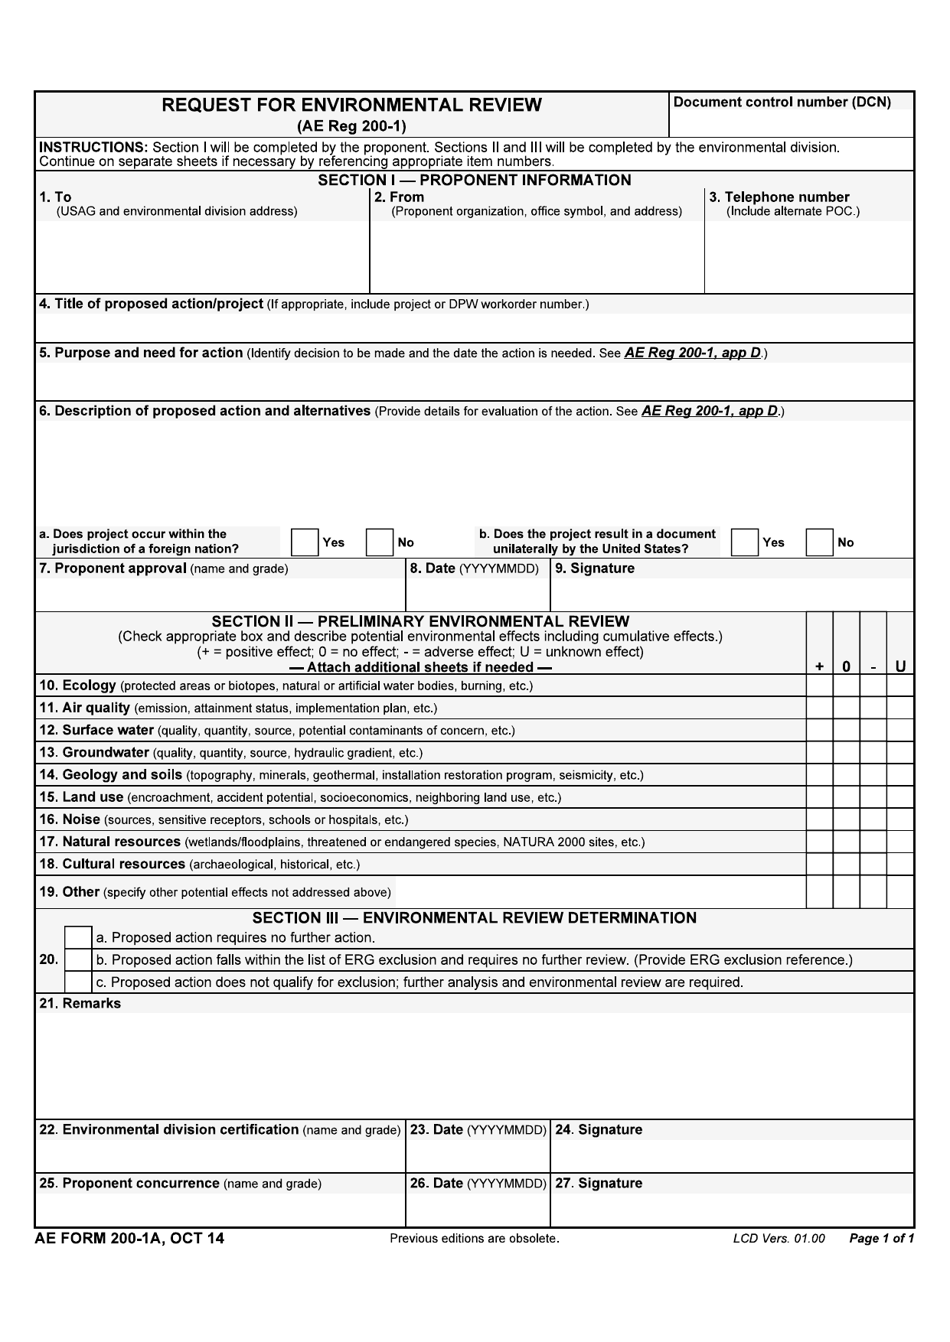 AE Form 200-1A Request for Environmental Review, Page 1